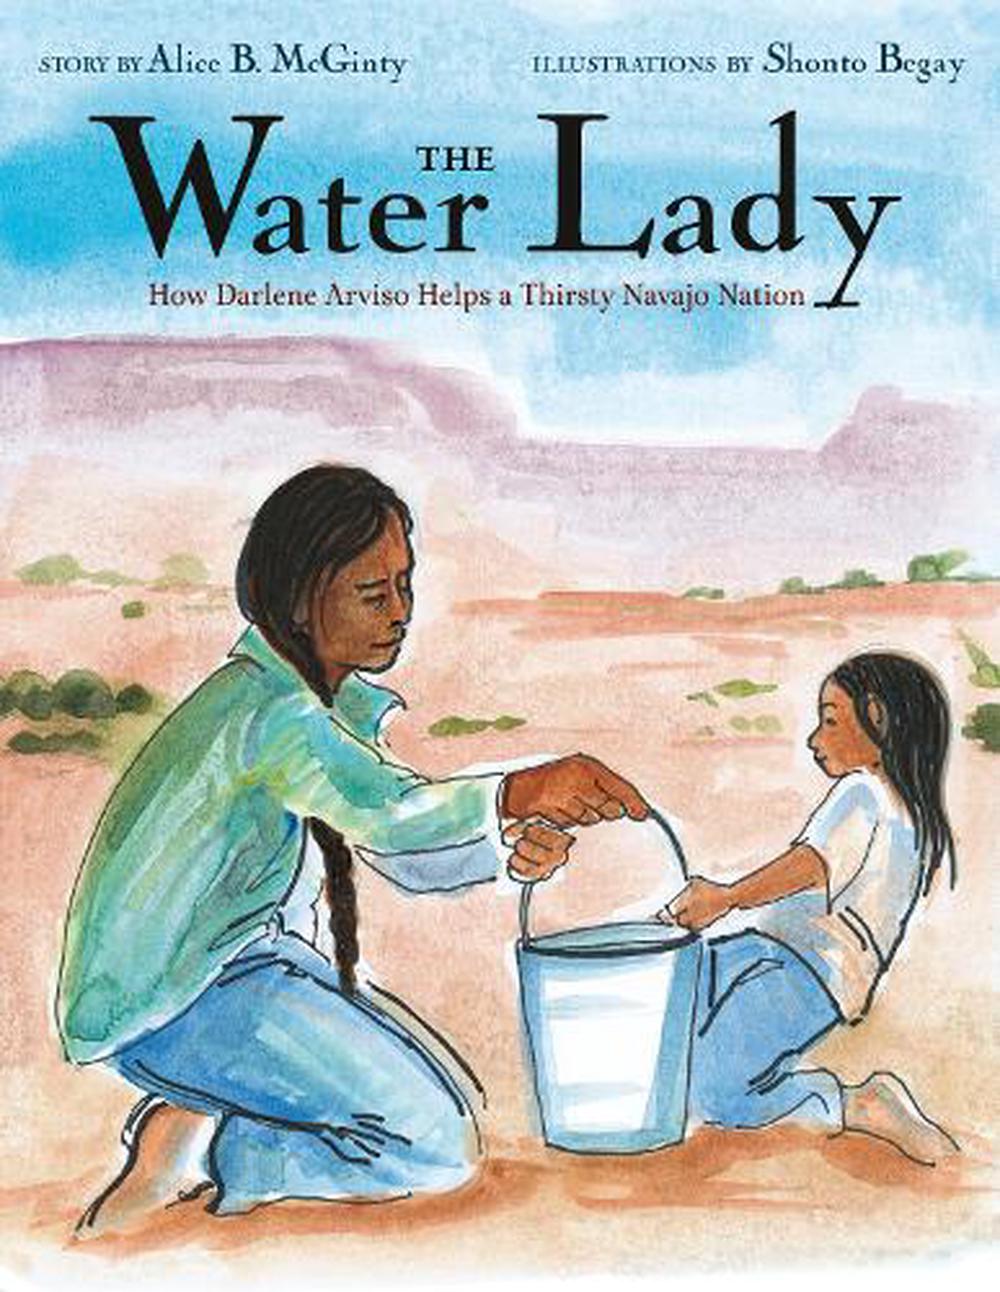 The　The　by　B.　Alice　Water　Darlene　9780525645016　at　McGinty,　online　Lady:　How　Helps　Thirsty　Buy　Hardcover,　Arviso　Nation　Navajo　a　Nile